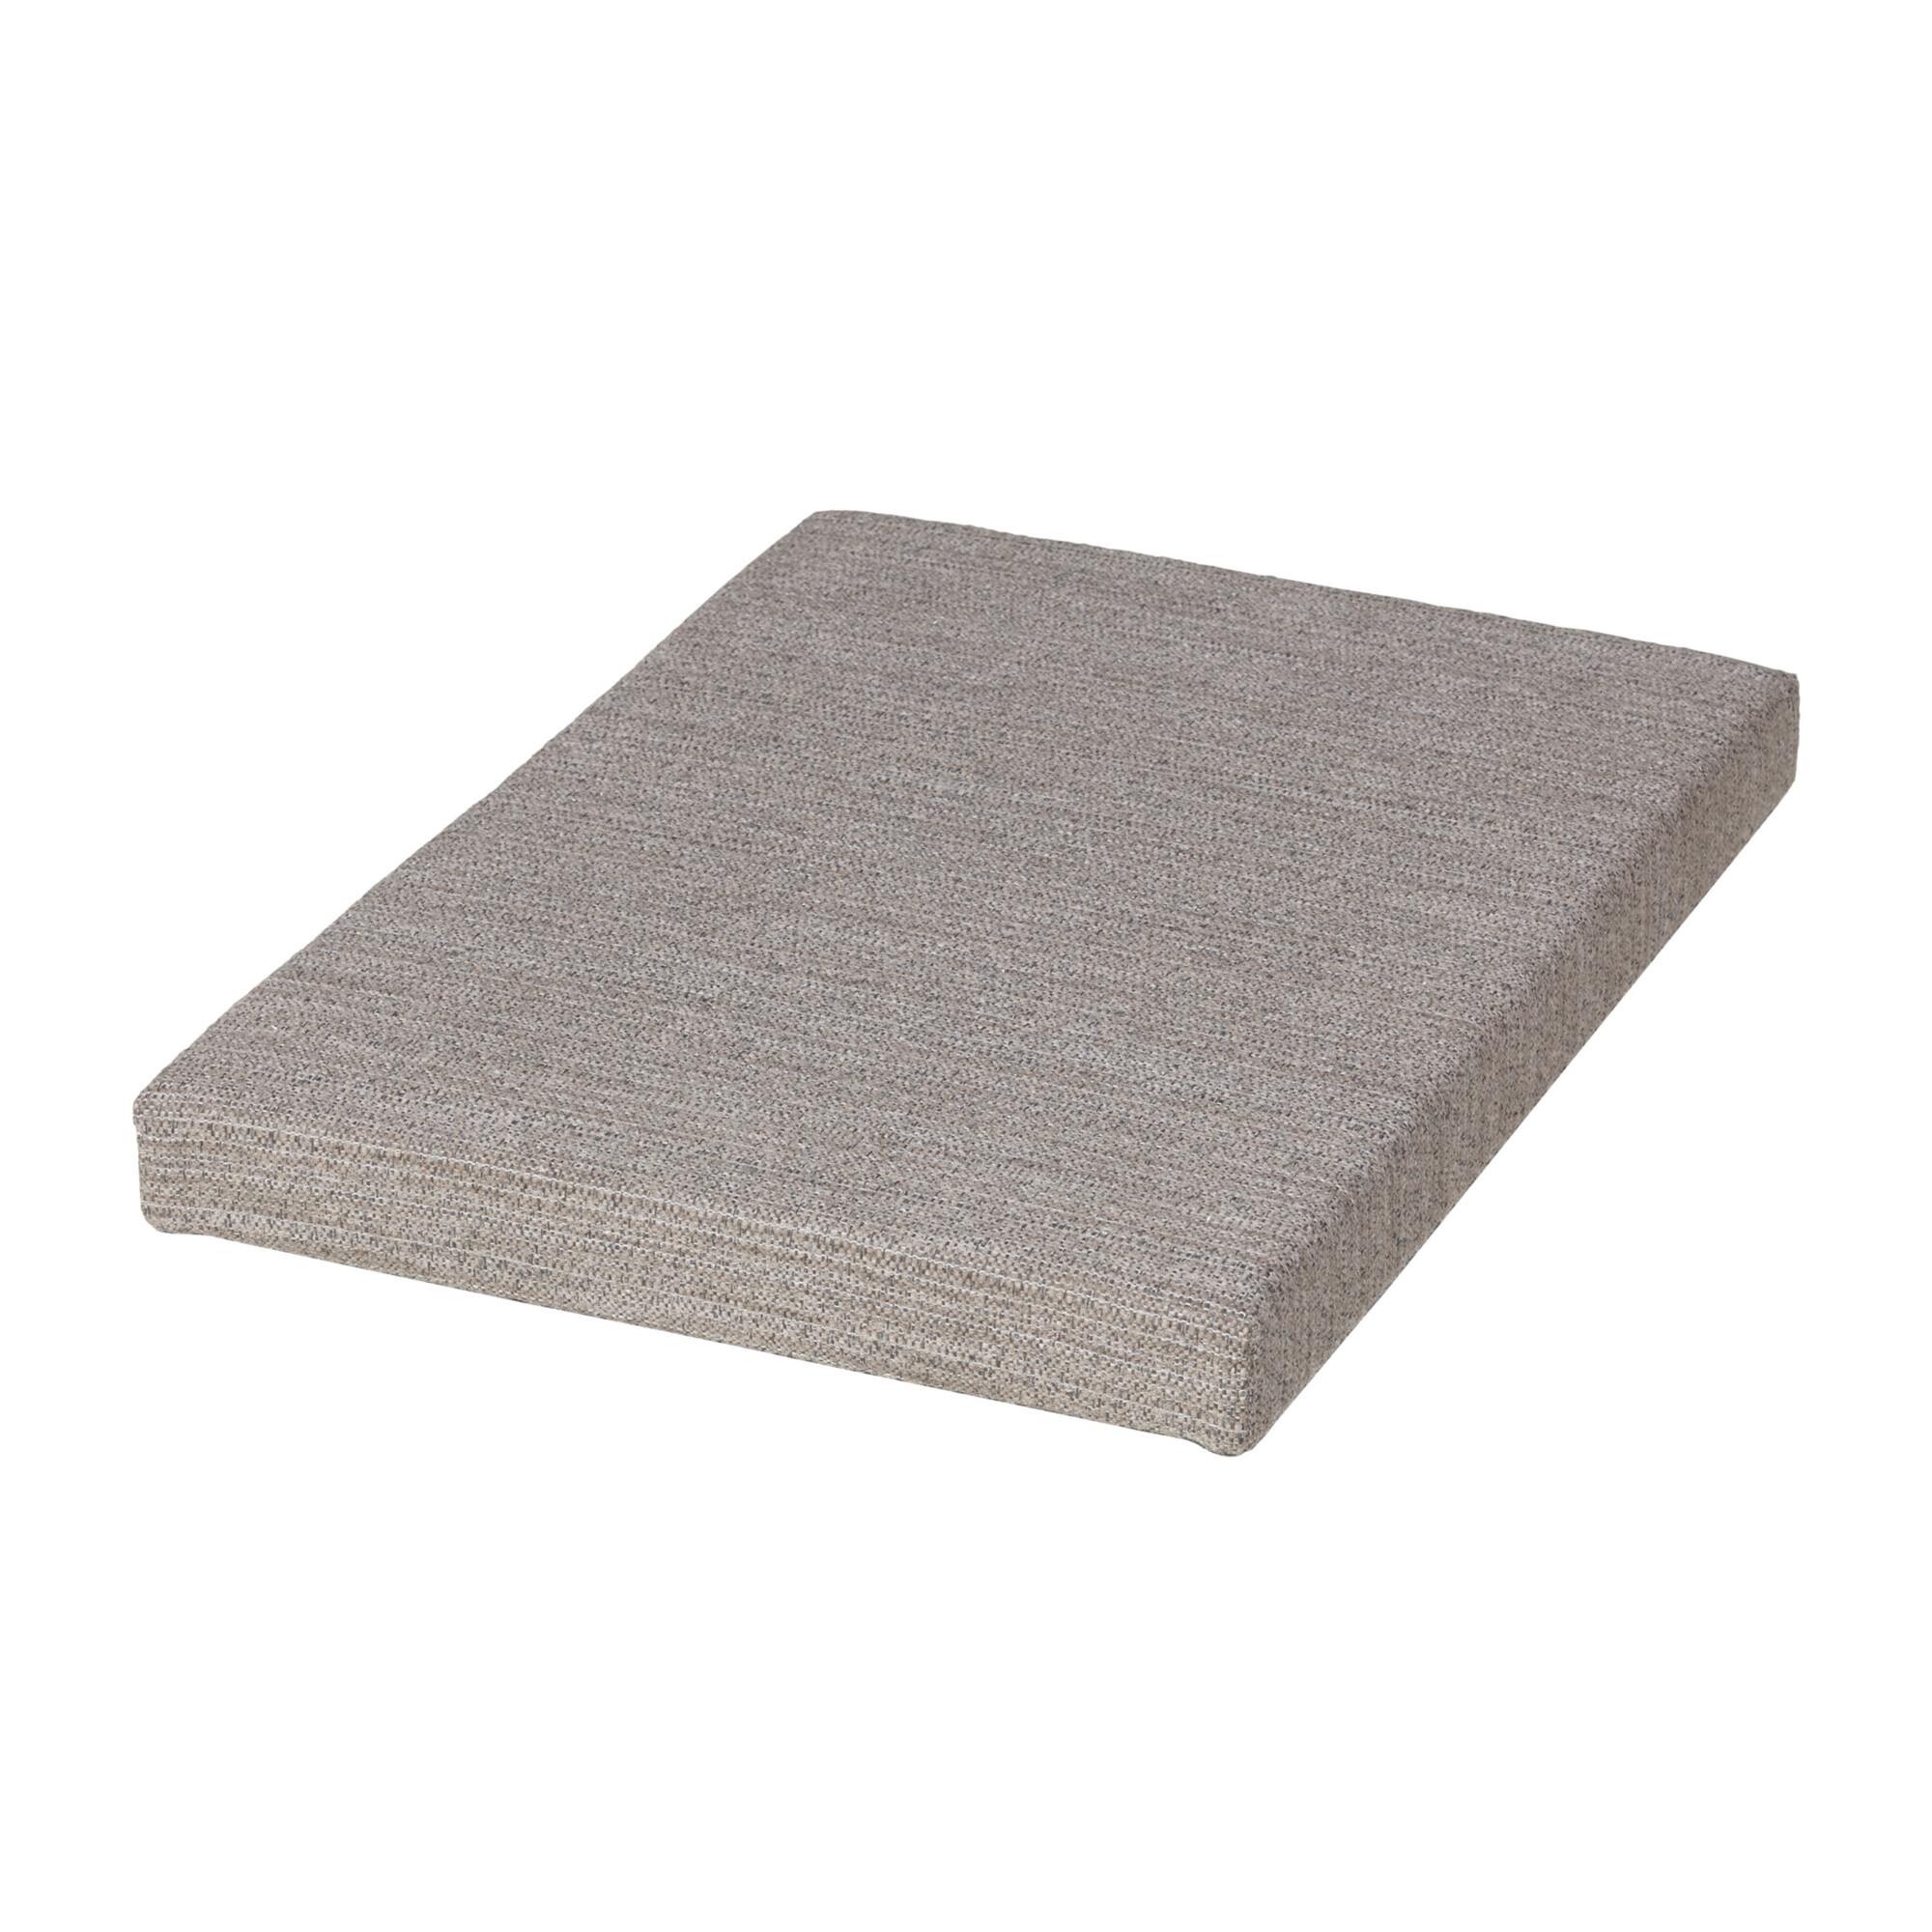 Hirsh Industries, Seat Cushion for 20Inch Pedestal, Shape Rectangle, Fabric Material Polyester, Model 20530